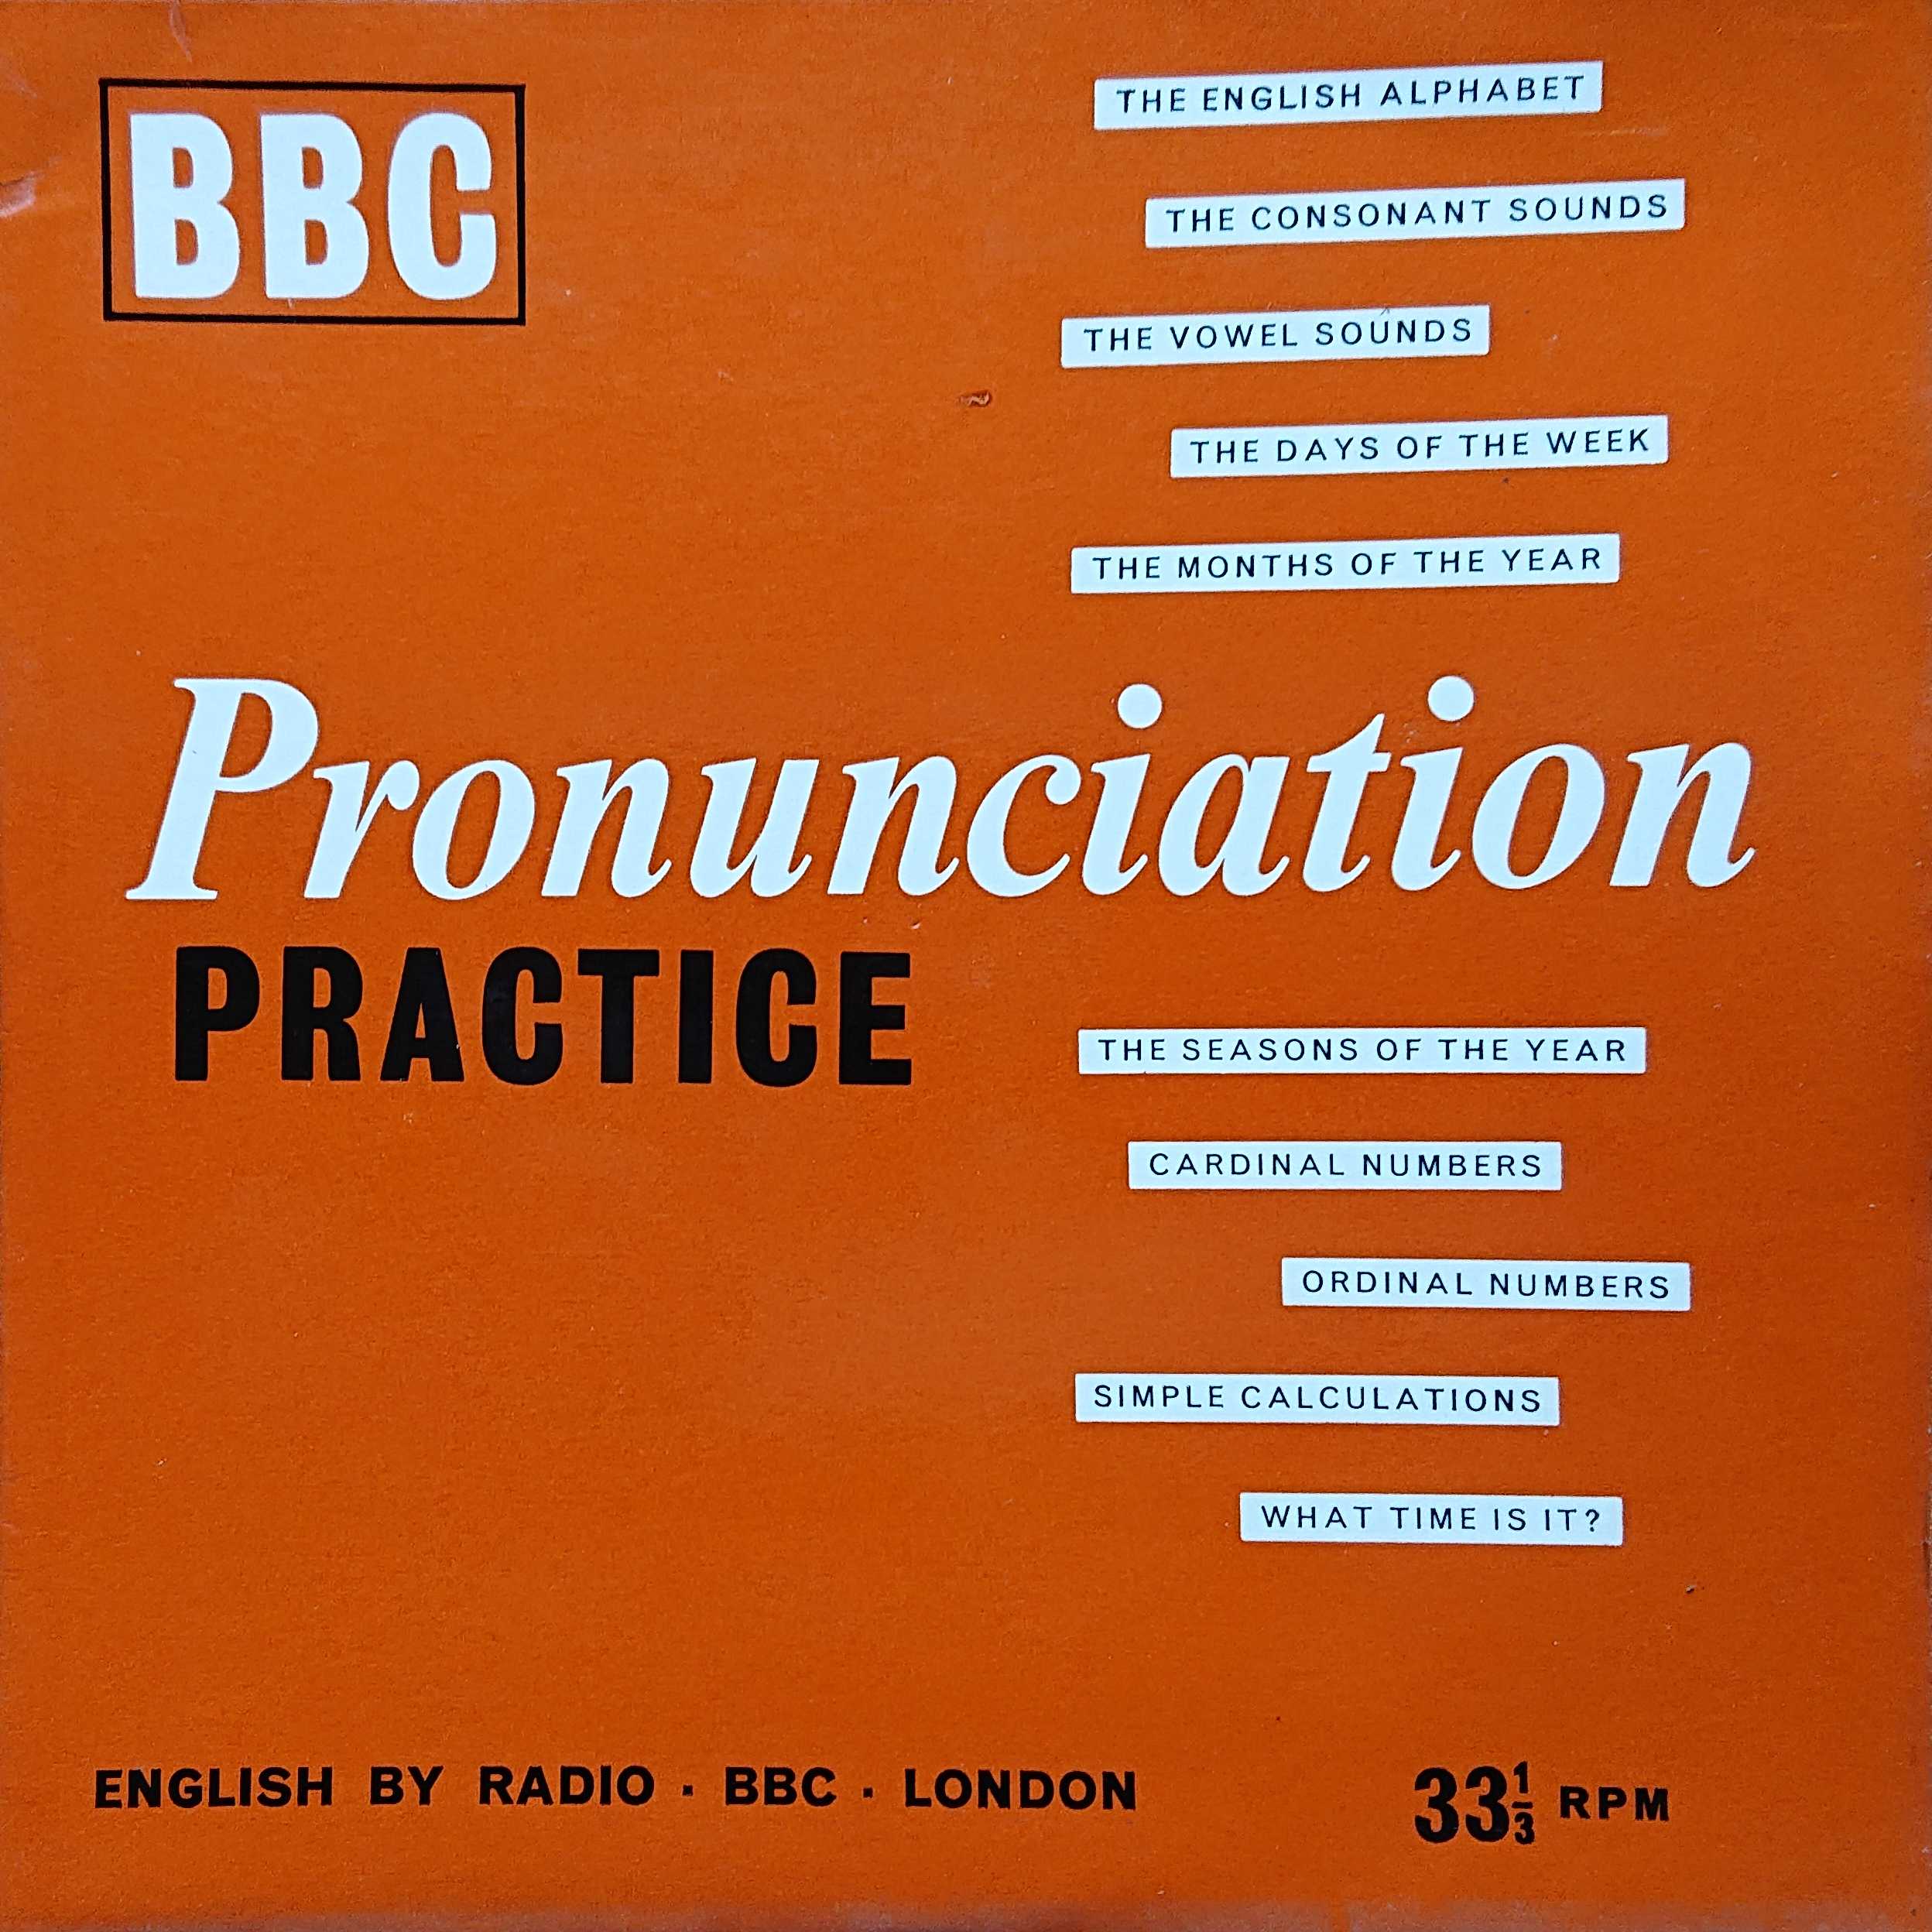 Picture of PP 1 Pronunciation practice by artist Various from the BBC singles - Records and Tapes library